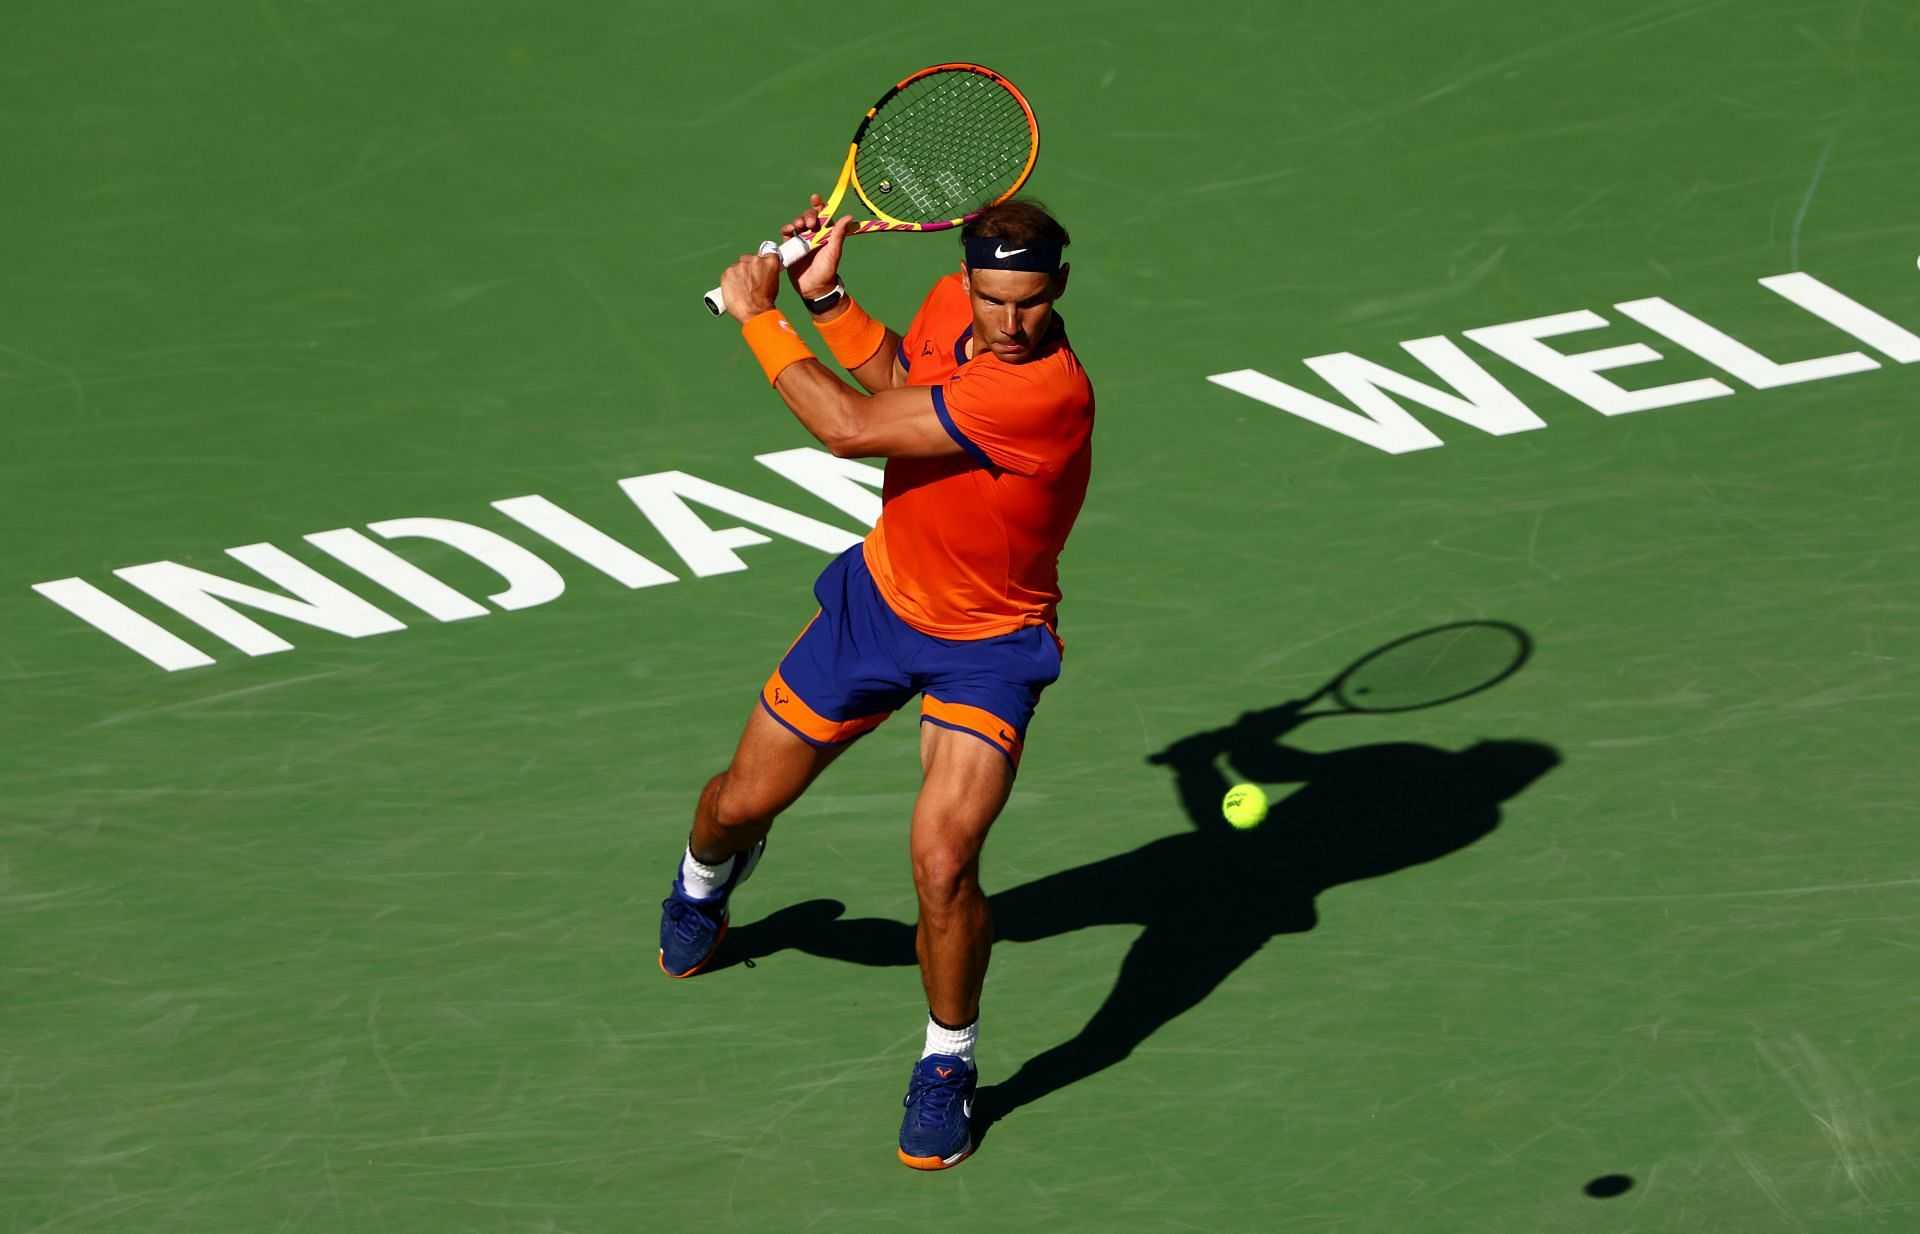 Rafael Nadal suffered a rib stress fracture during the Indian Wells Masterser caption